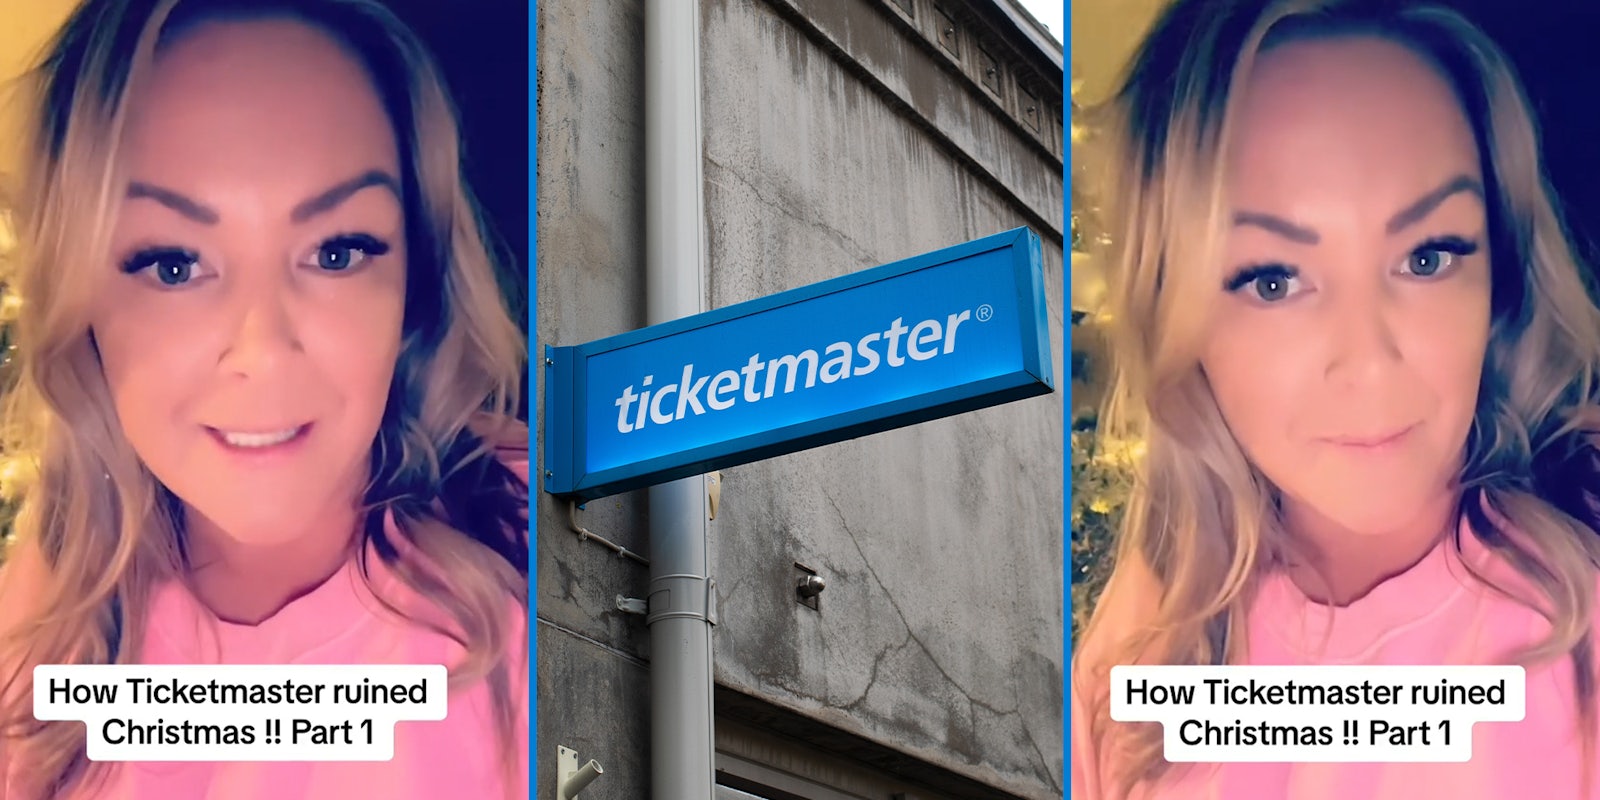 Customer says Ticketmaster 'ruined Christmas' after she got hacked and they did nothing